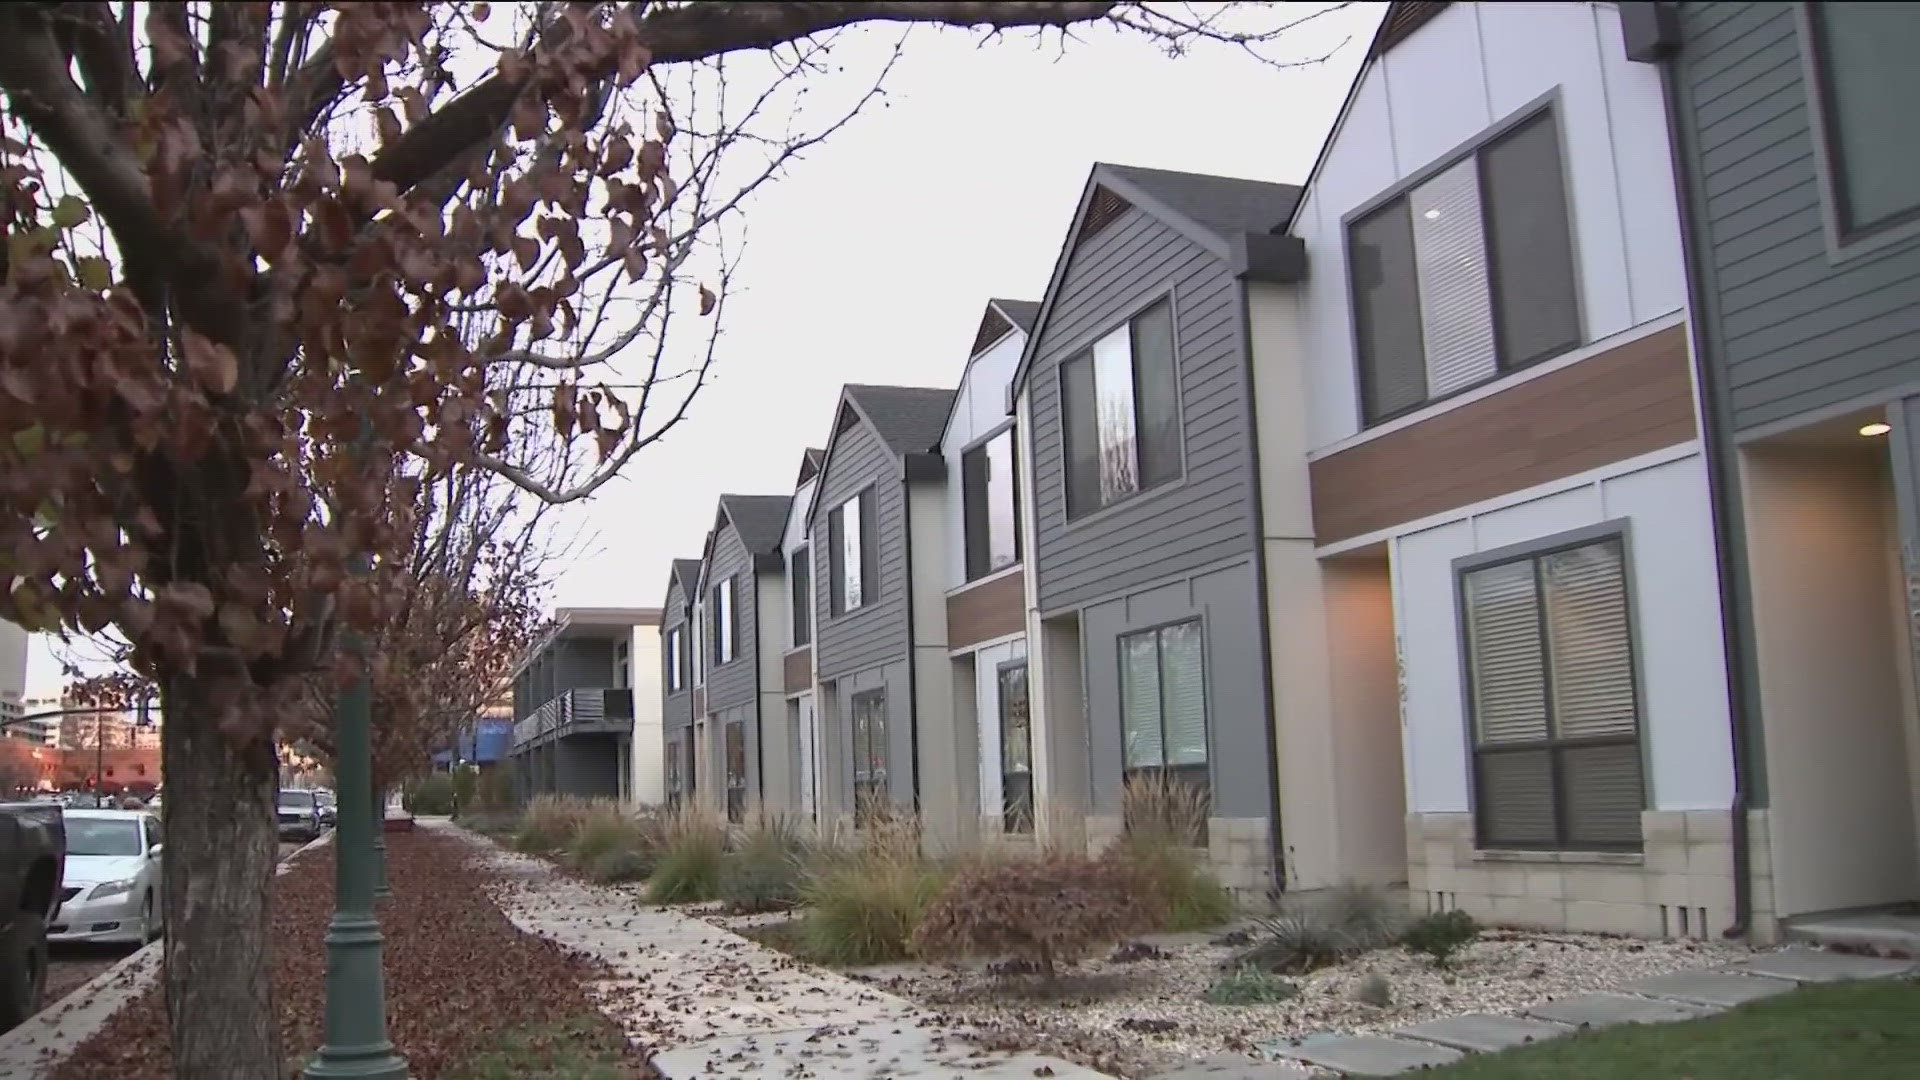 One woman said renters like herself around the Treasure Valley are wrongfully judged for previous financial decisions.